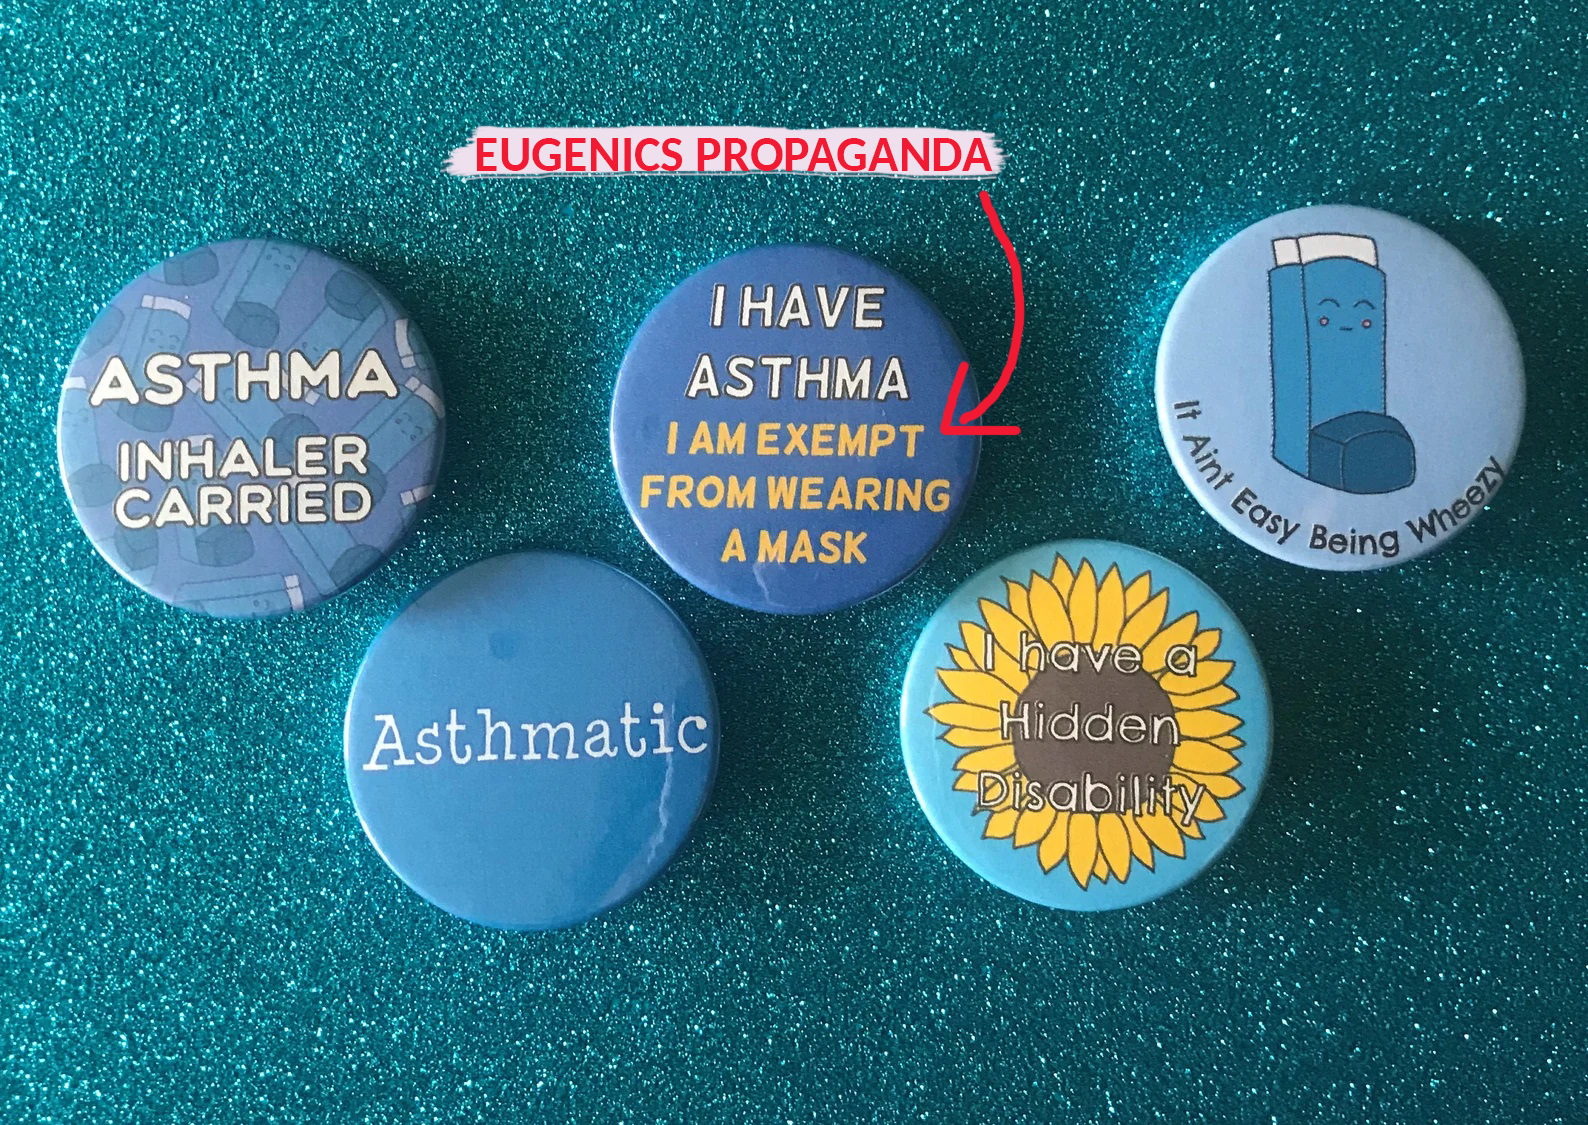 5 pins, one that says "I have asthma I am exempt from wearing a mask"